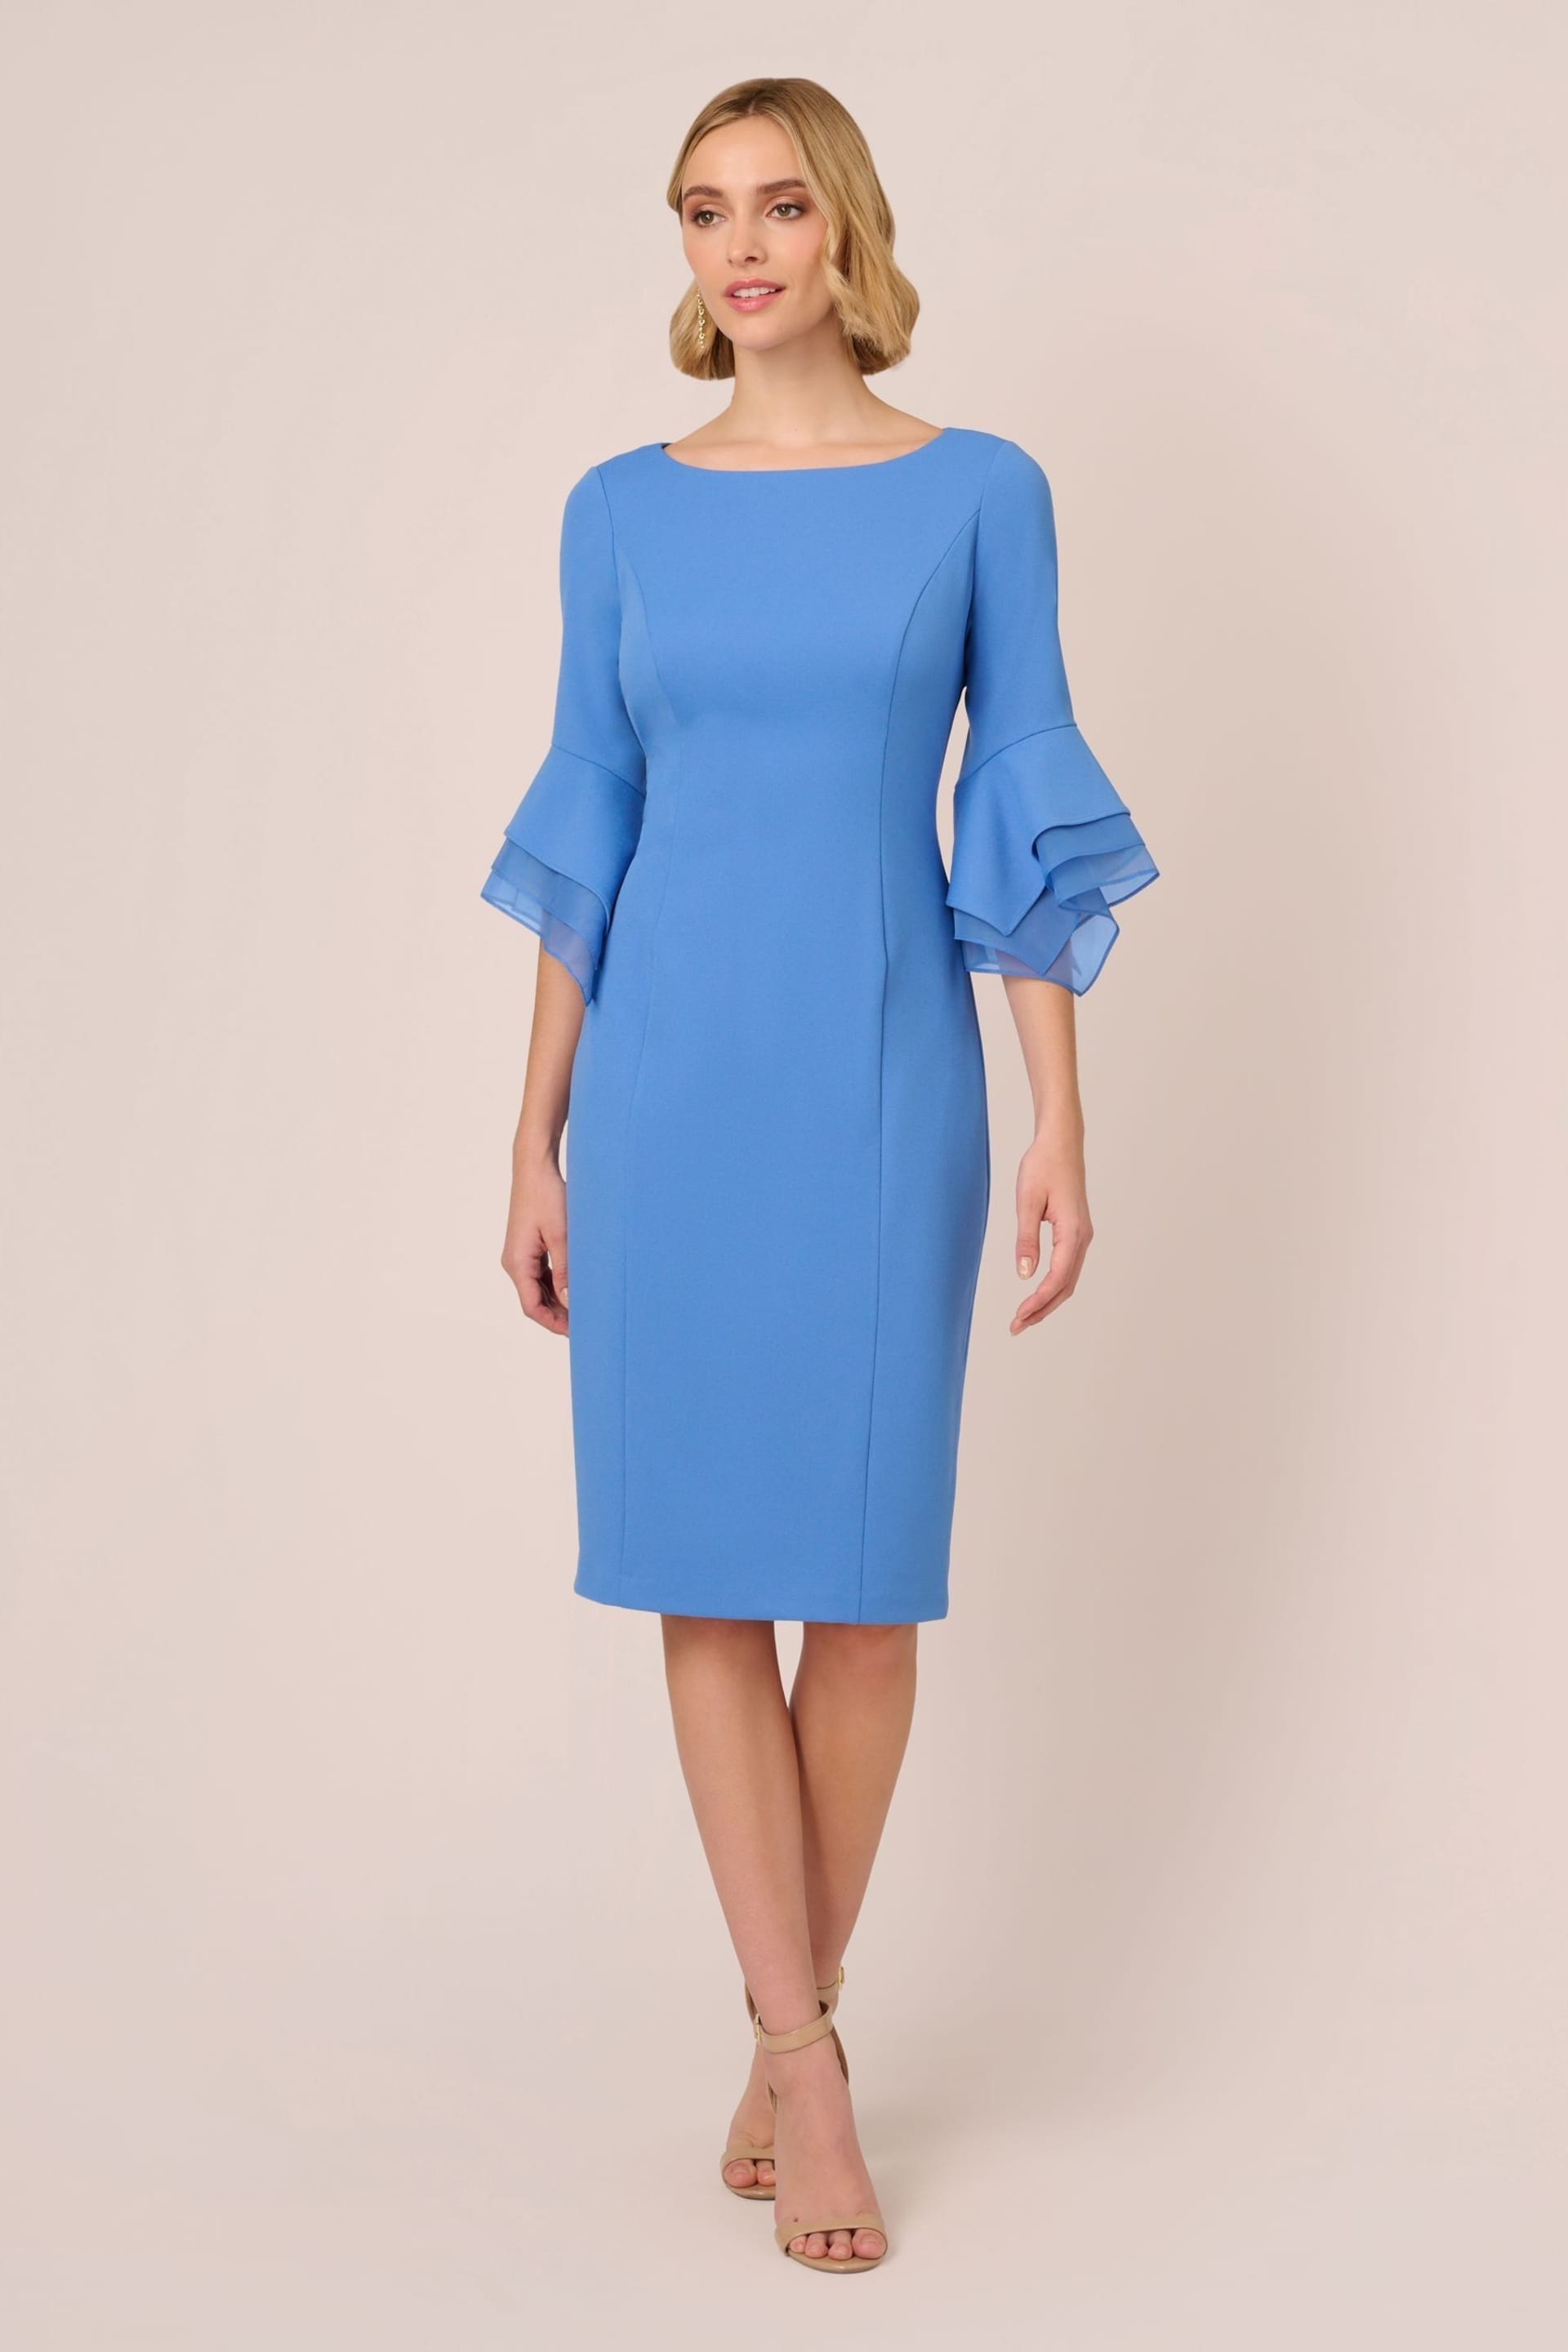 Adrianna Papell Blue Knit Crepe Tiered Sleeve Dress - Image 1 of 7